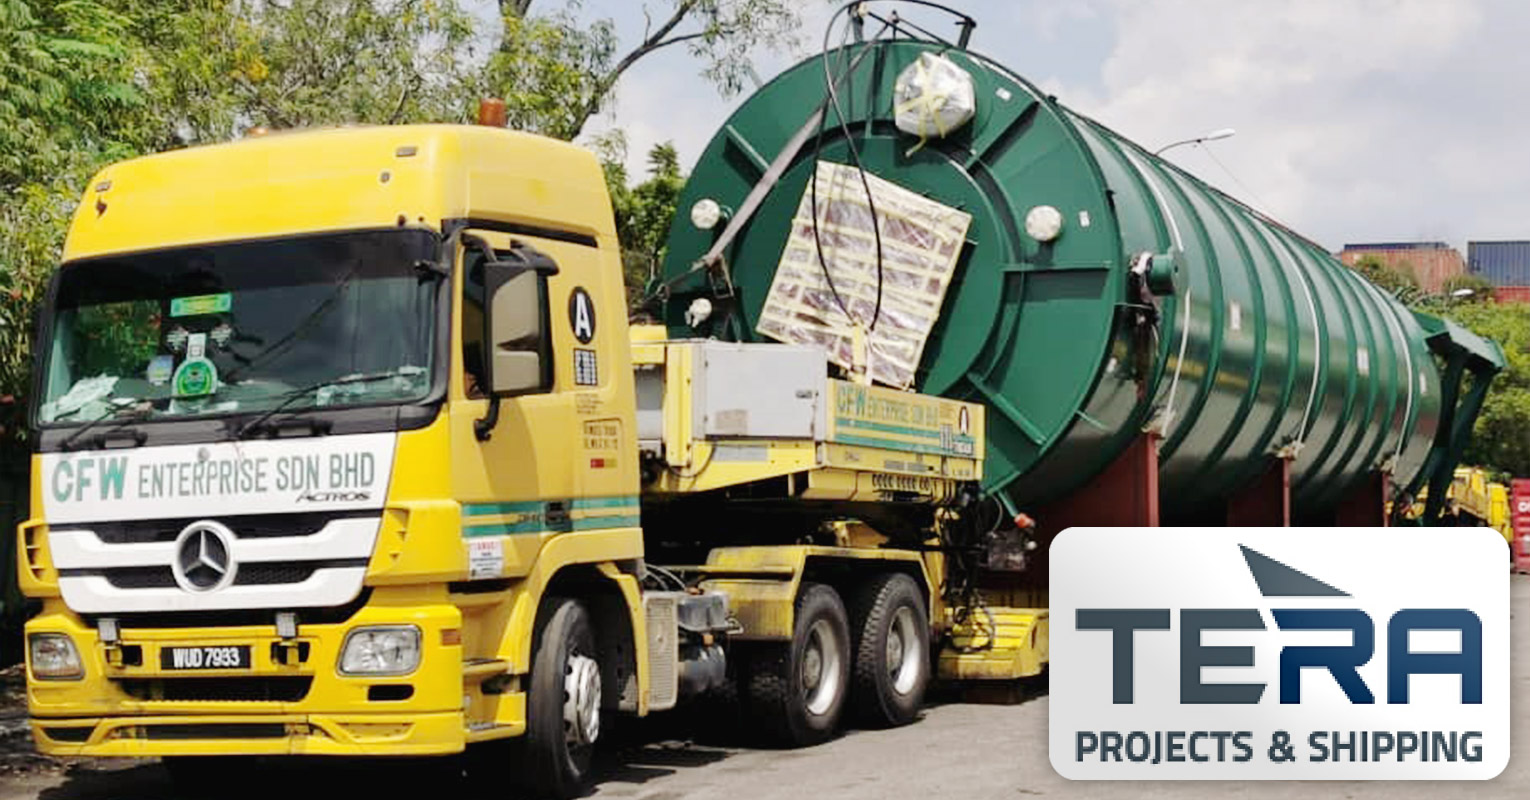 Tera Projects Trucked Project Cargo Over 100km Using their Own Bridge Telescopic Low Loader for Overall Transport Height of 5,62m